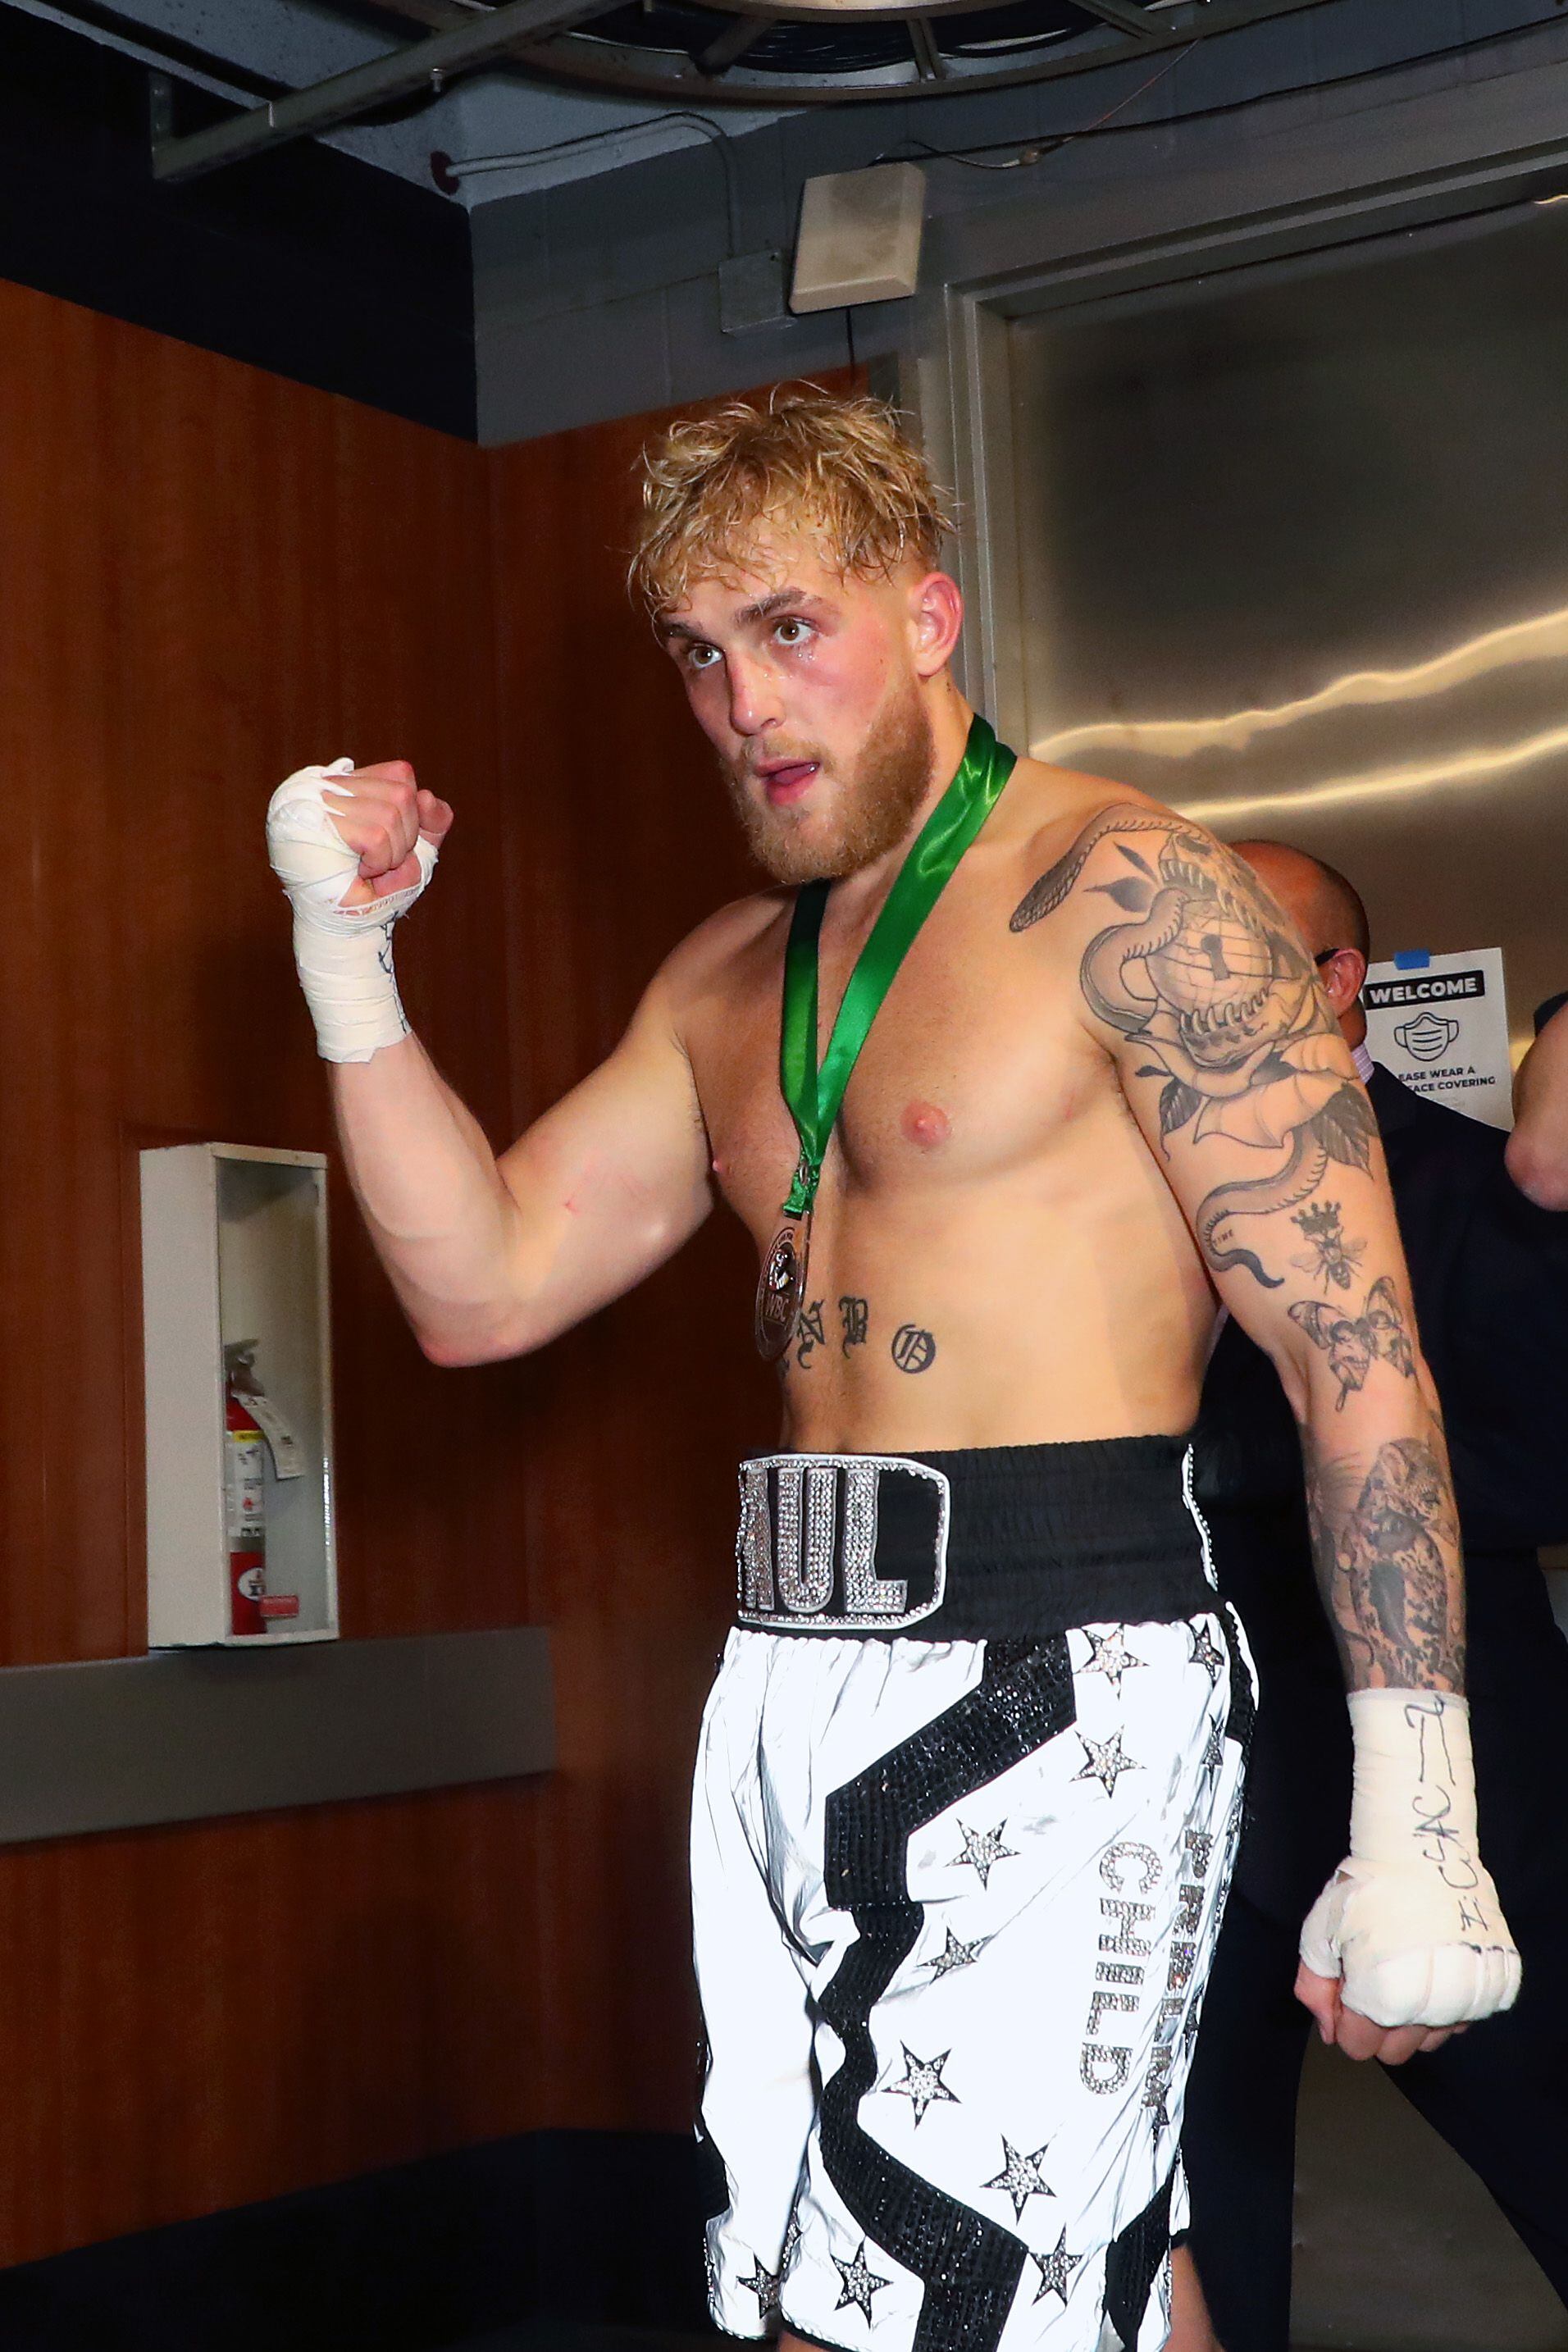 Jake Paul offers UFC fighter Conor McGregor $50 million to box him